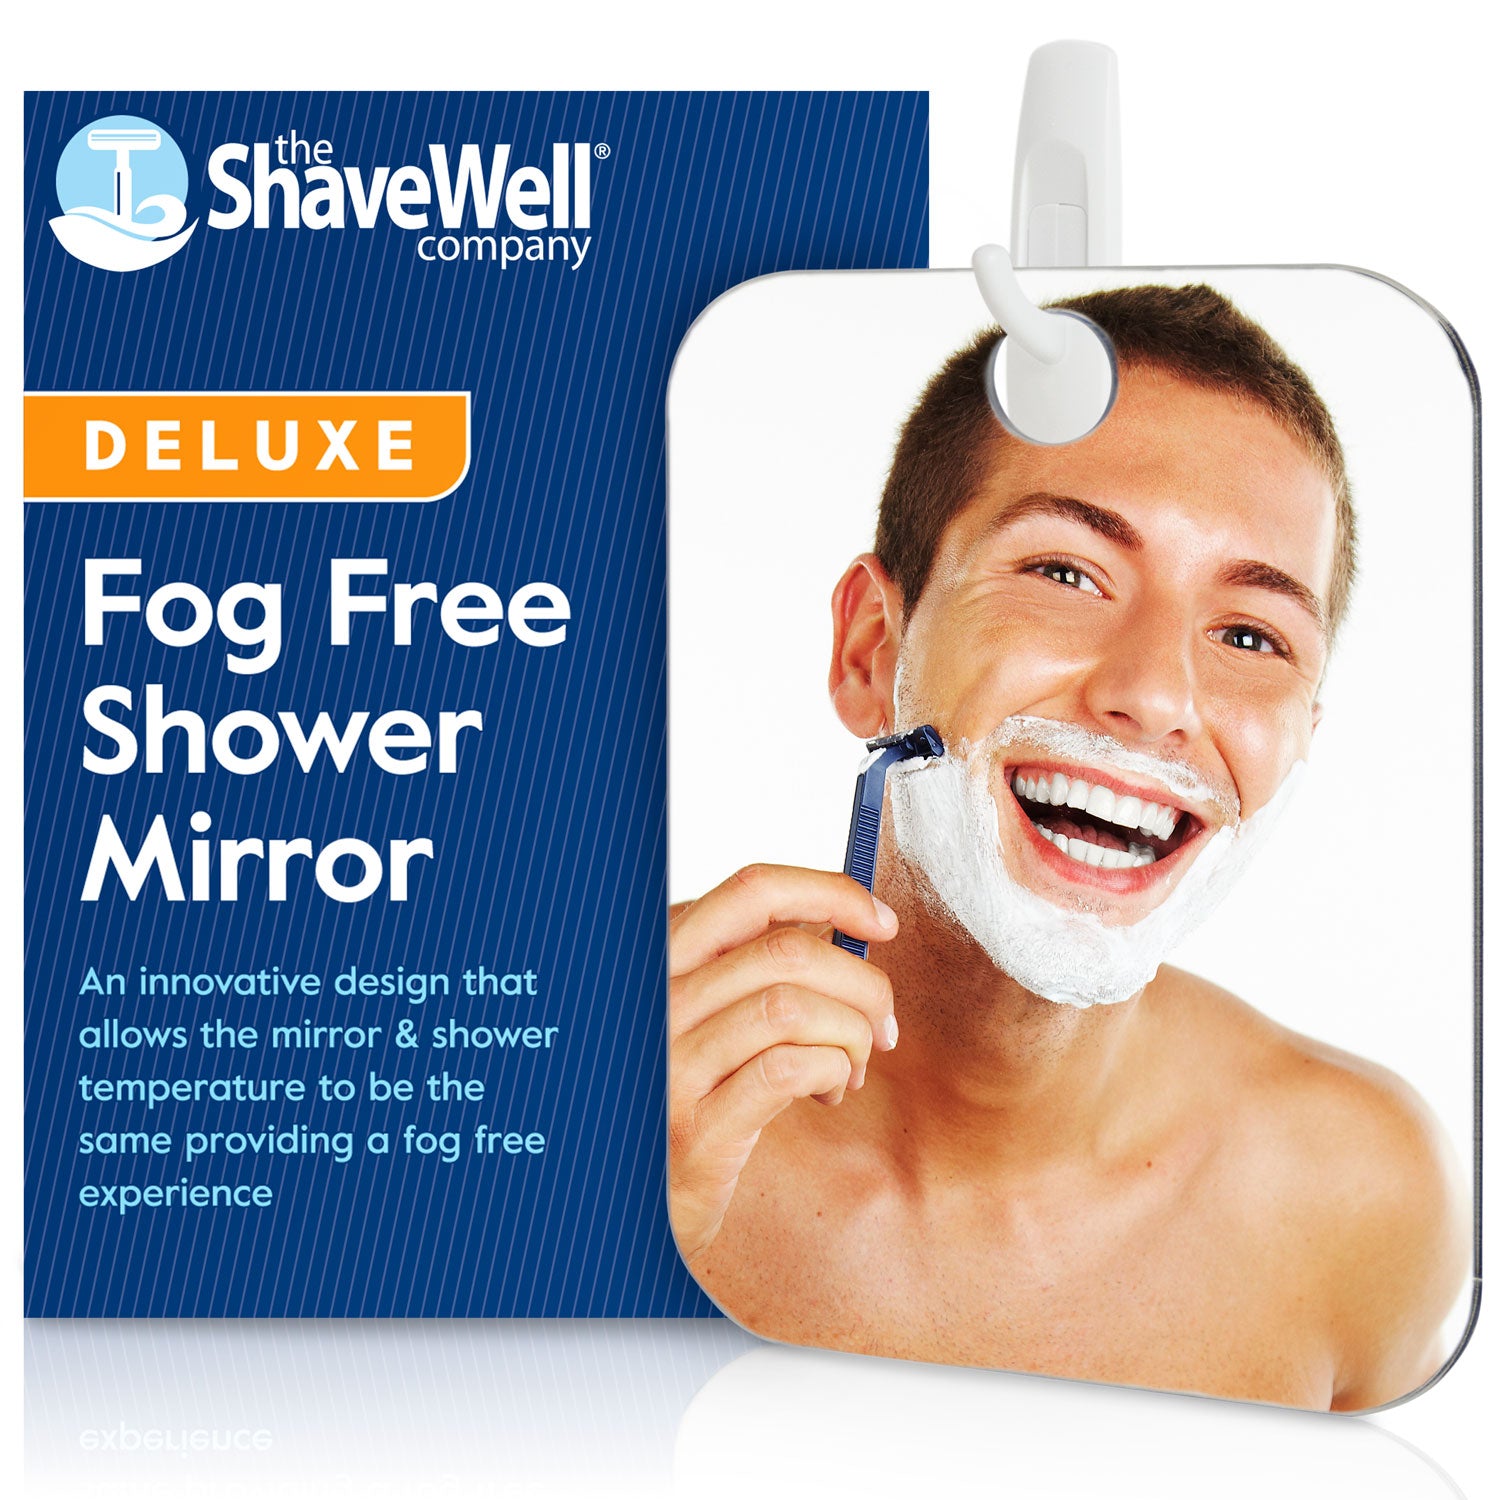 Unbreakable Locker Mirror - The Shave Well Company, White